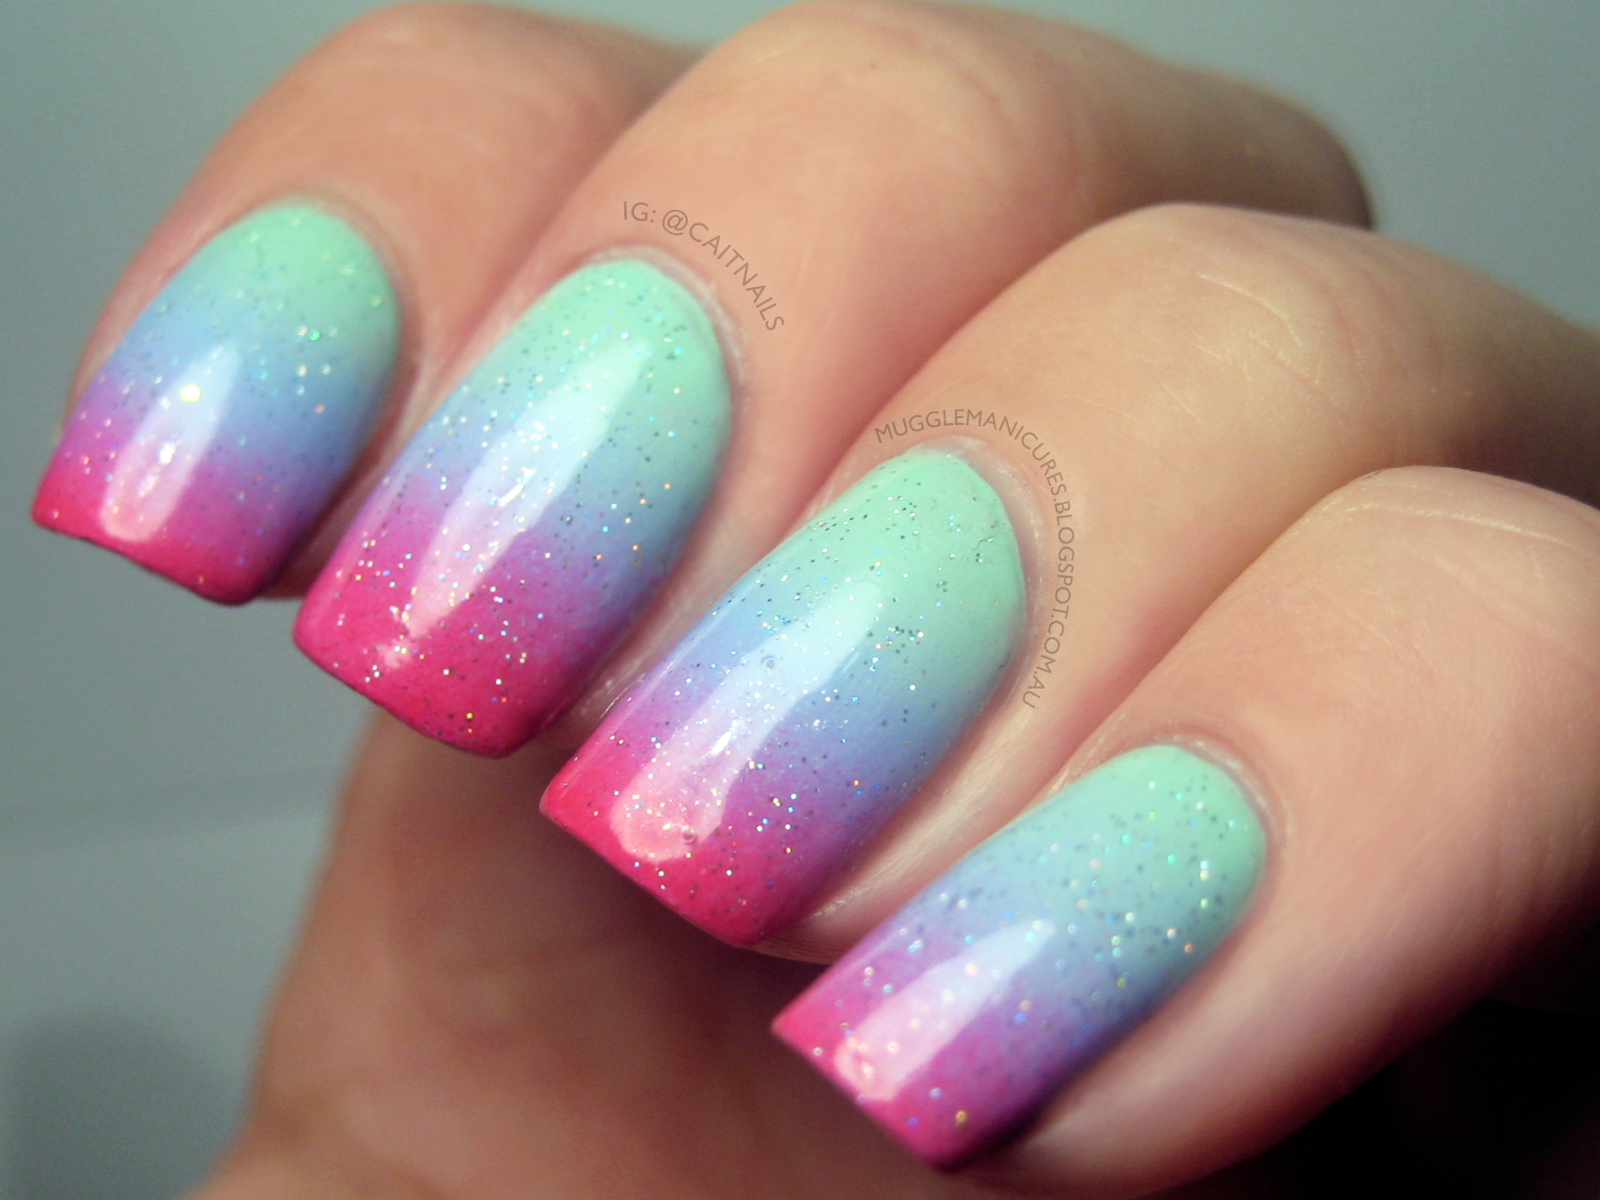 1. Gradient Nail Art Designs for a Chic and Colorful Look - wide 6